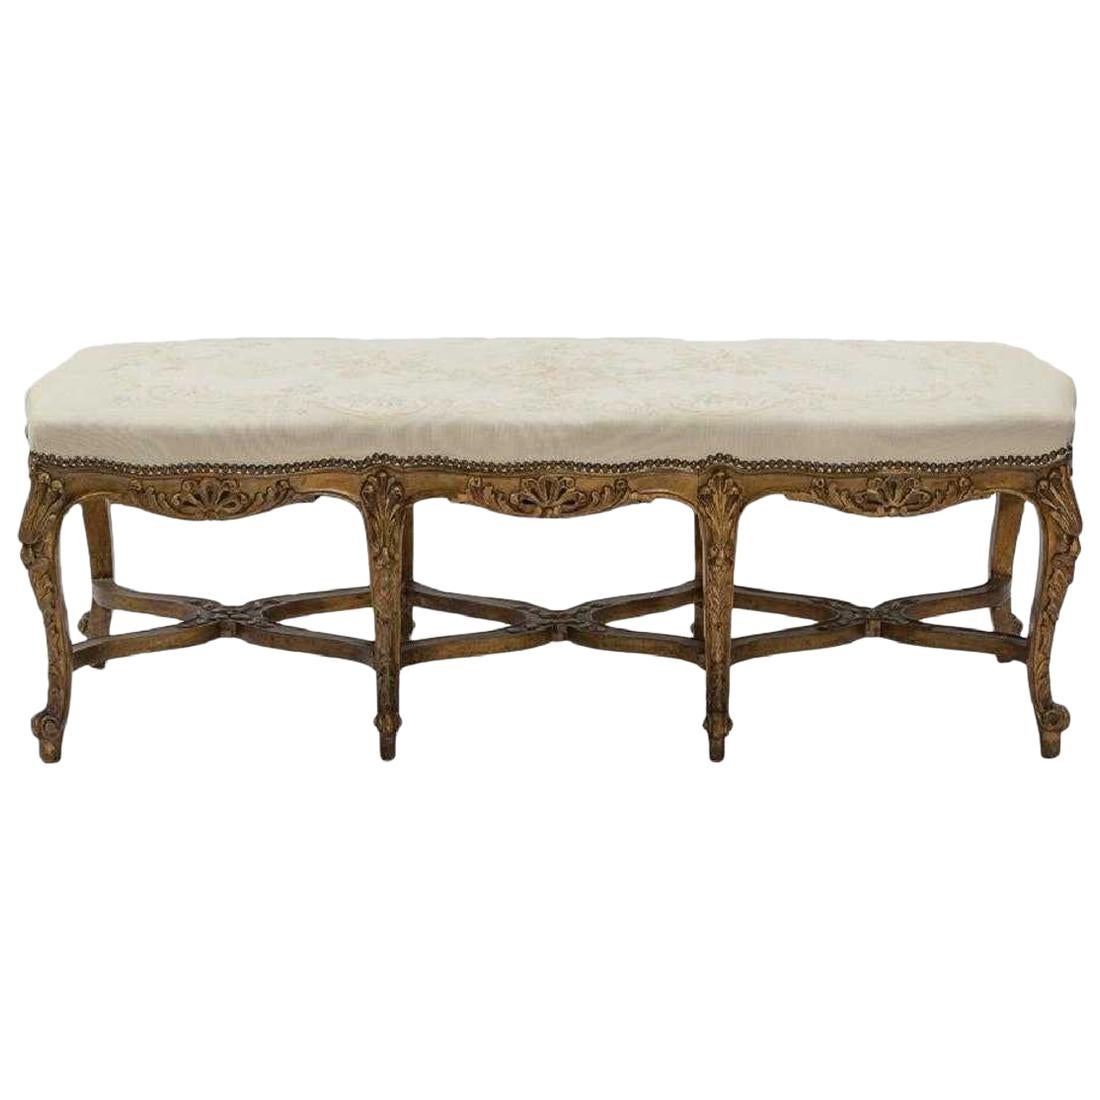 French Louis XV Style Carved Giltwood Bench, 19th Century